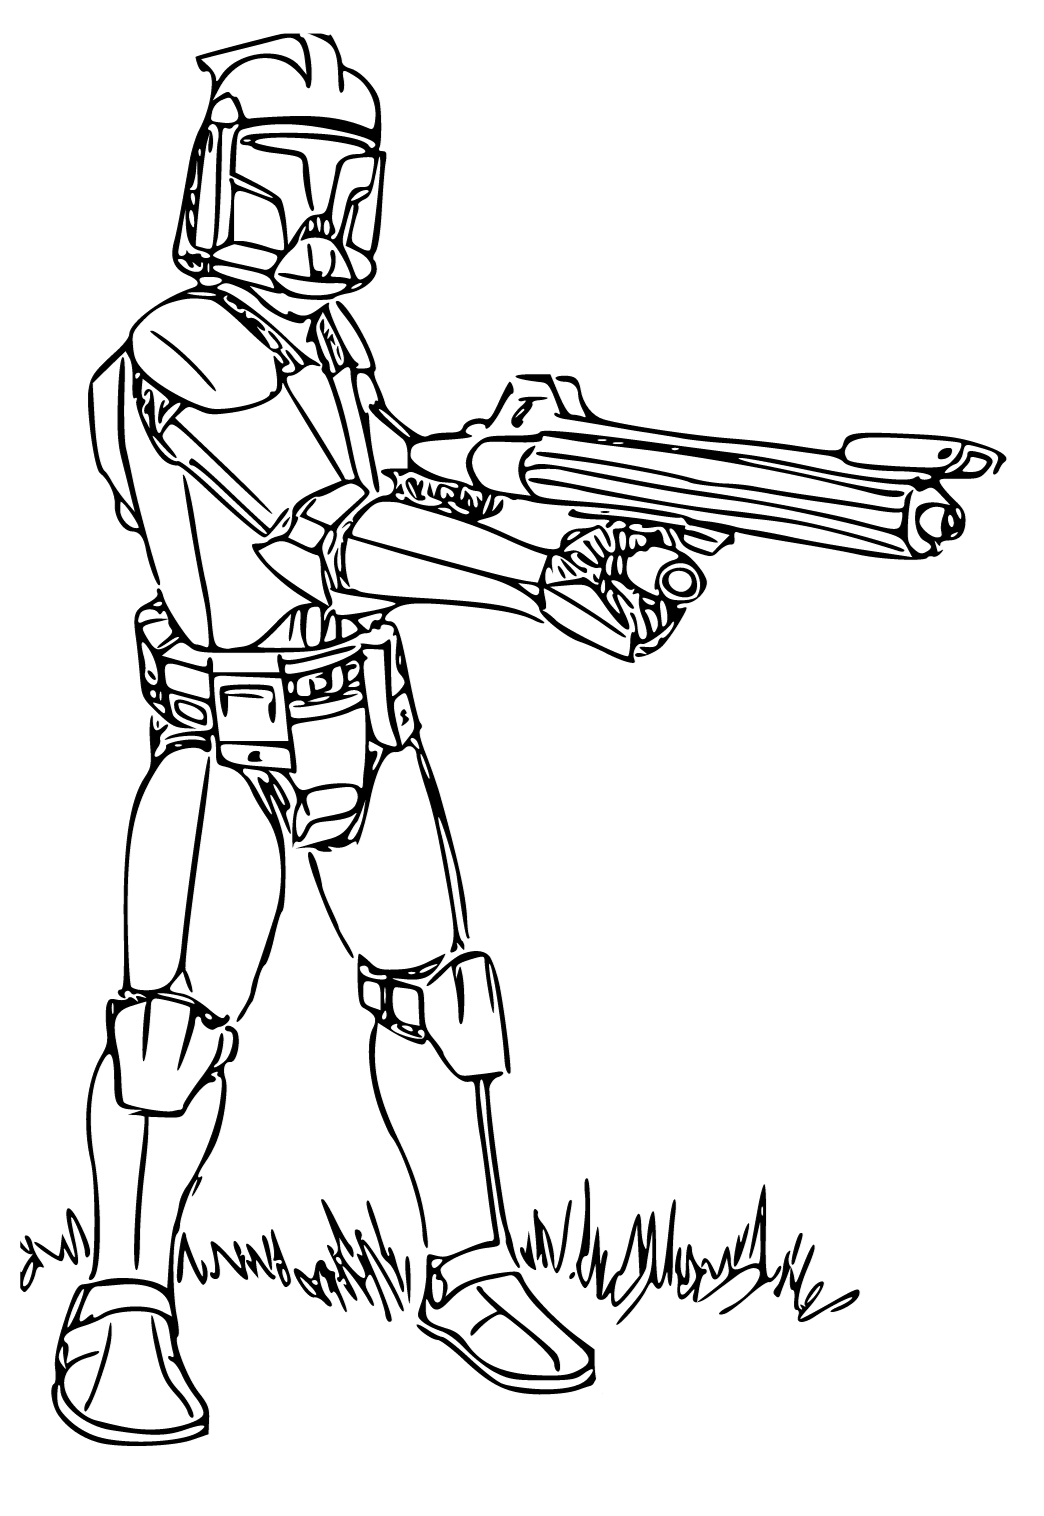 Free printable clone trooper soldier coloring page for adults and kids